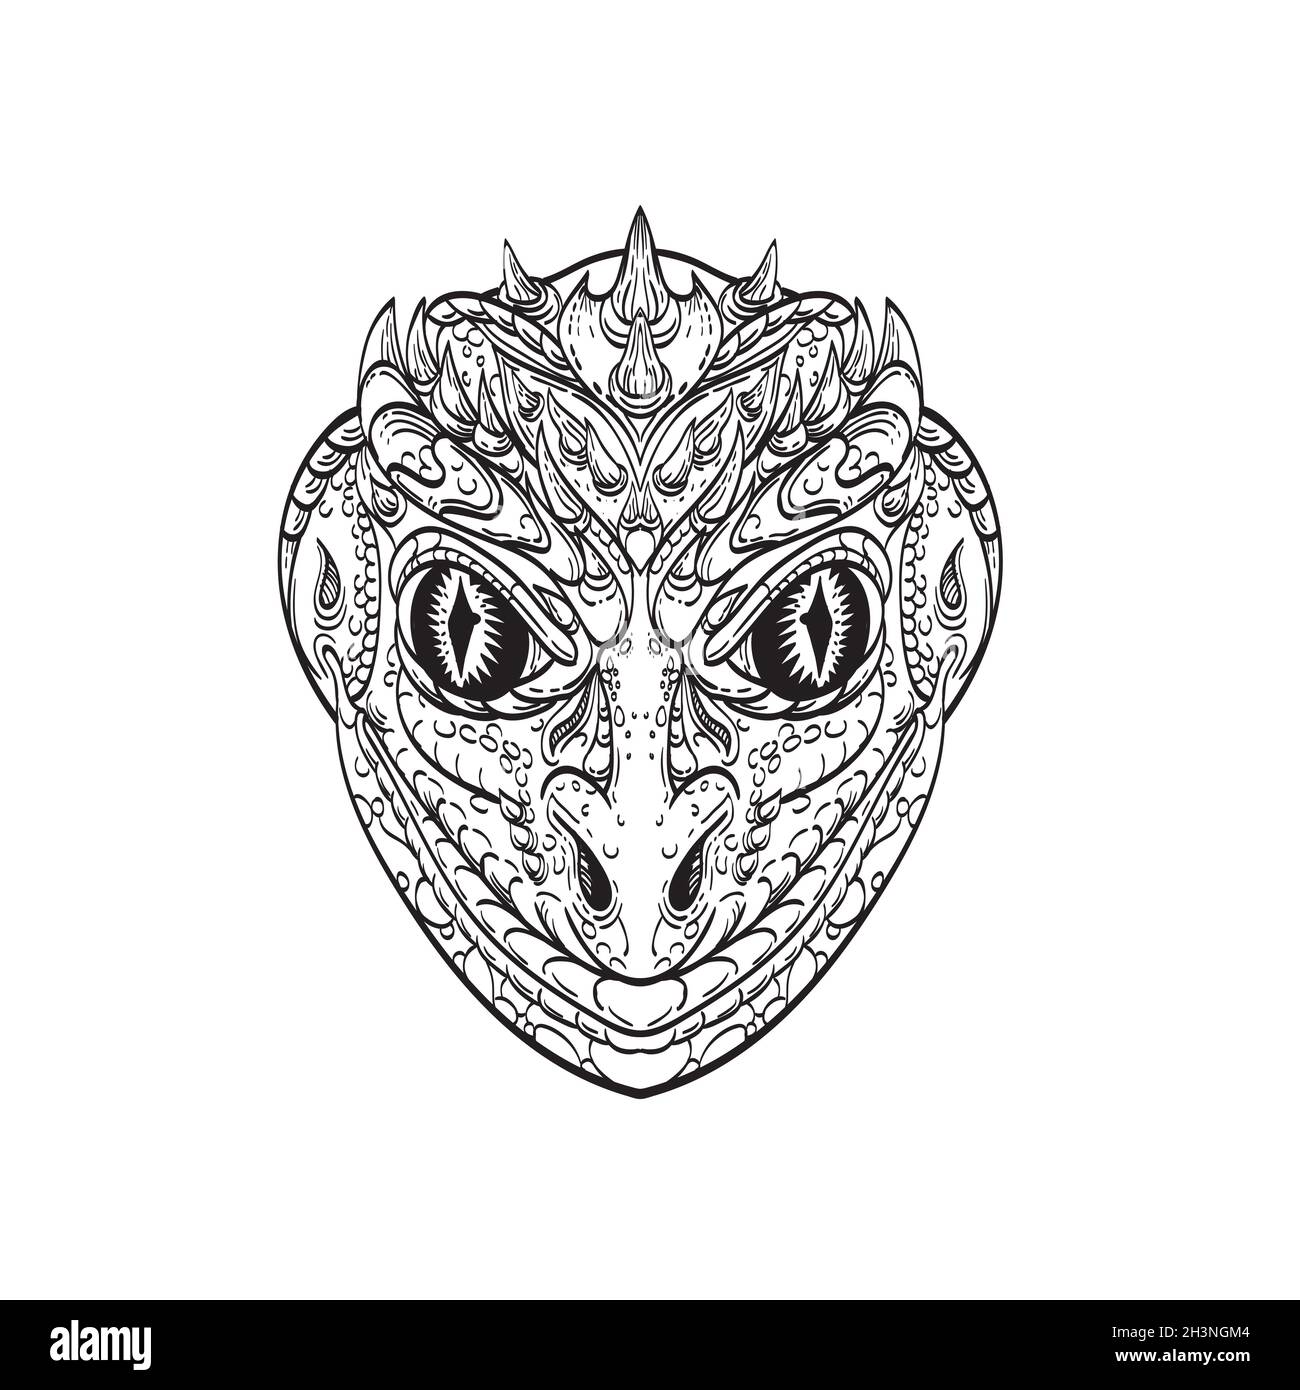 Head of a Reptilian Humanoid or Anthropomorphic Reptile Part Human Part Lizard Line Art Drawing Stock Photo